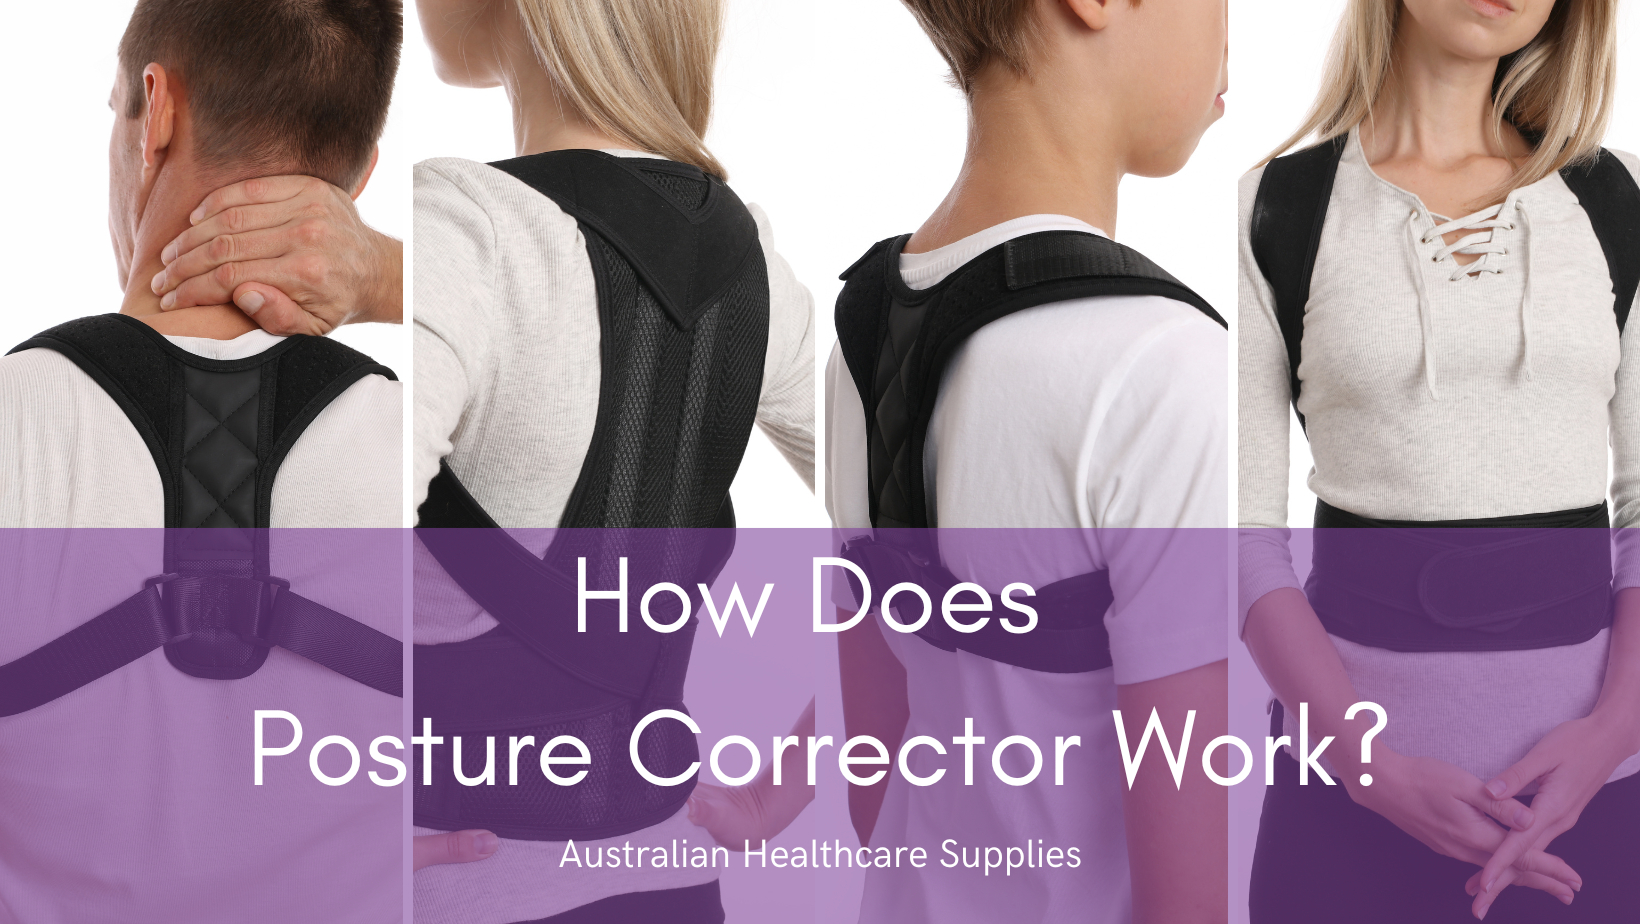 How Does Posture Corrector Work?